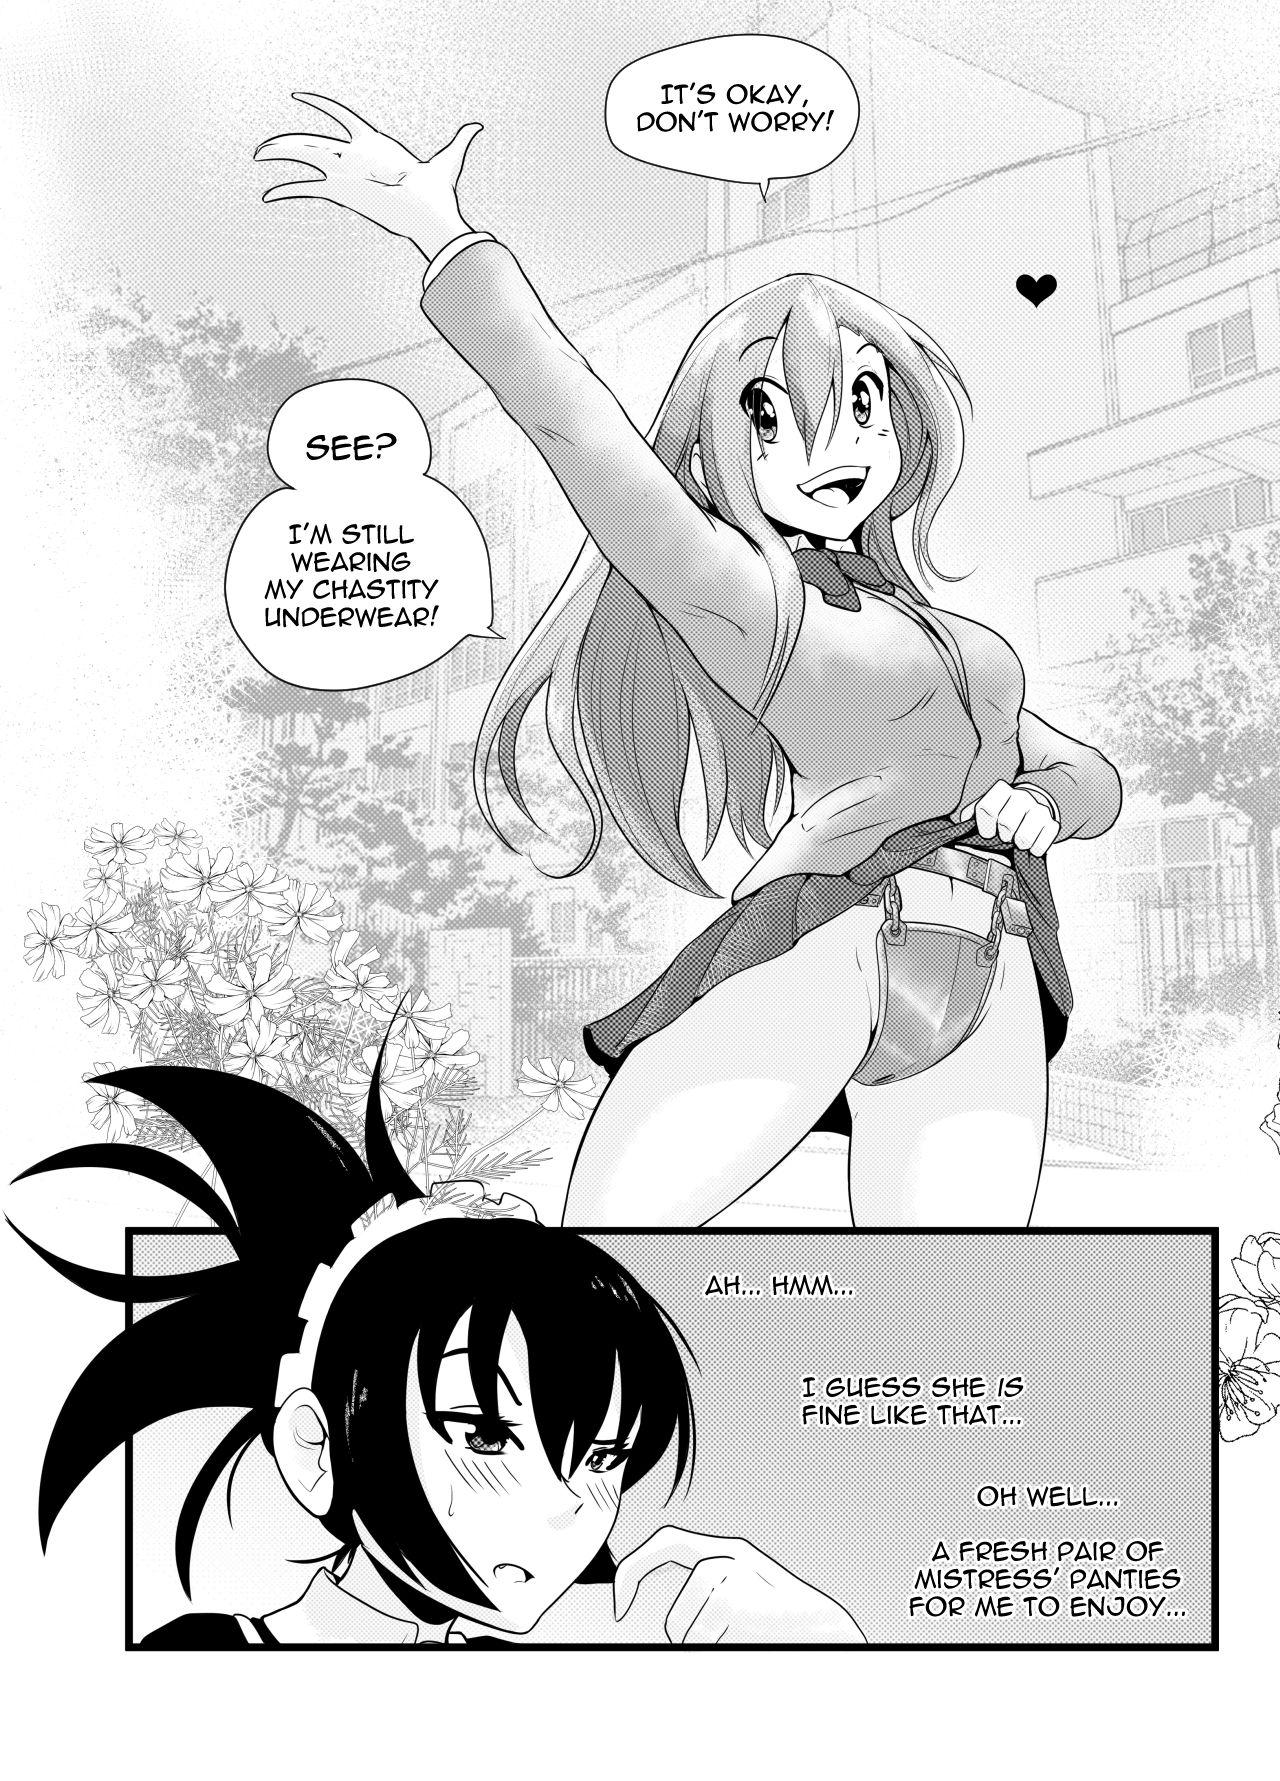 Young Old I Was Caught Masturbating by My Maid and She Locked Me in a Chastity Belt! - Seitokai yakuindomo Free Oral Sex - Page 12